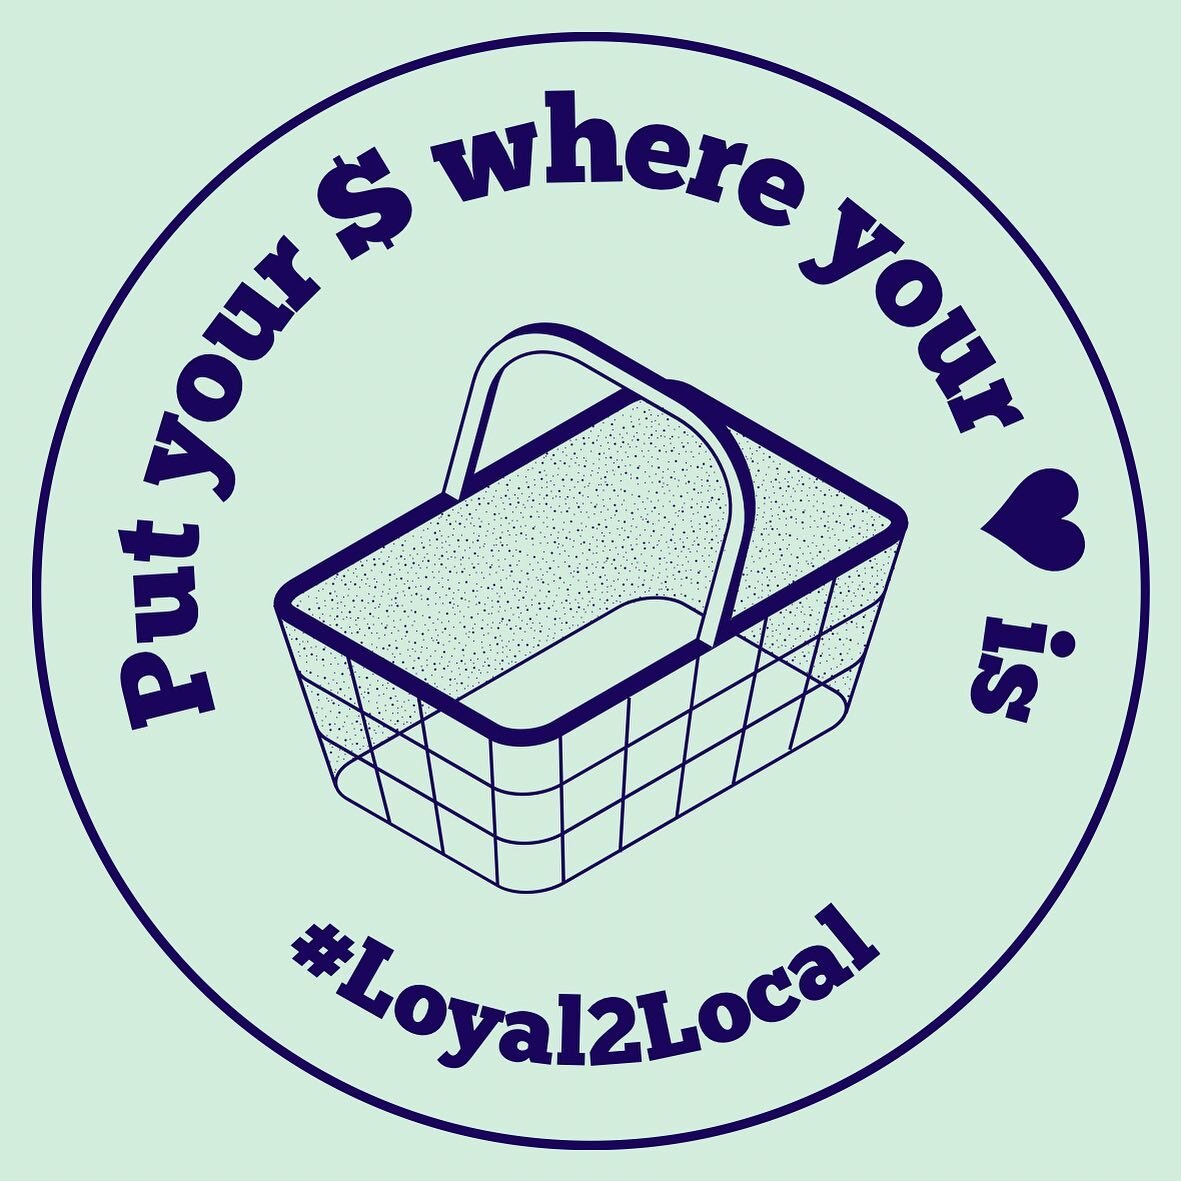 Thank you to all of the following renewing + new participants in the #Loyal2Local program! We appreciate you so much and we want to give you a huge THANK YOU for supporting and believing in our #L2L mission! 

@dickinsonareachamberofcommerce 
Norther